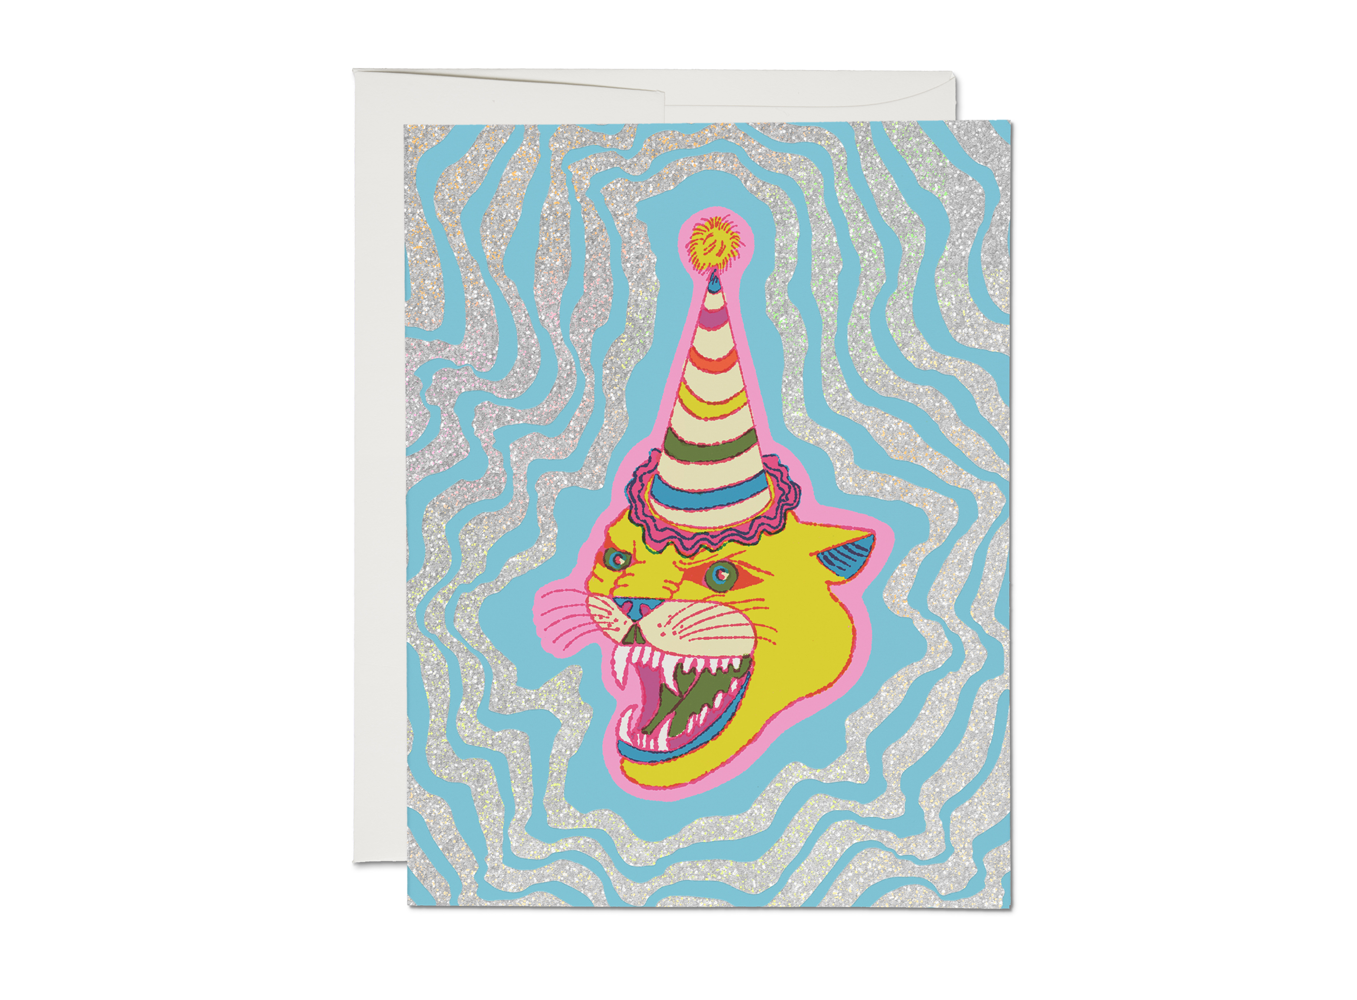 Party cat greeting card with sparkles